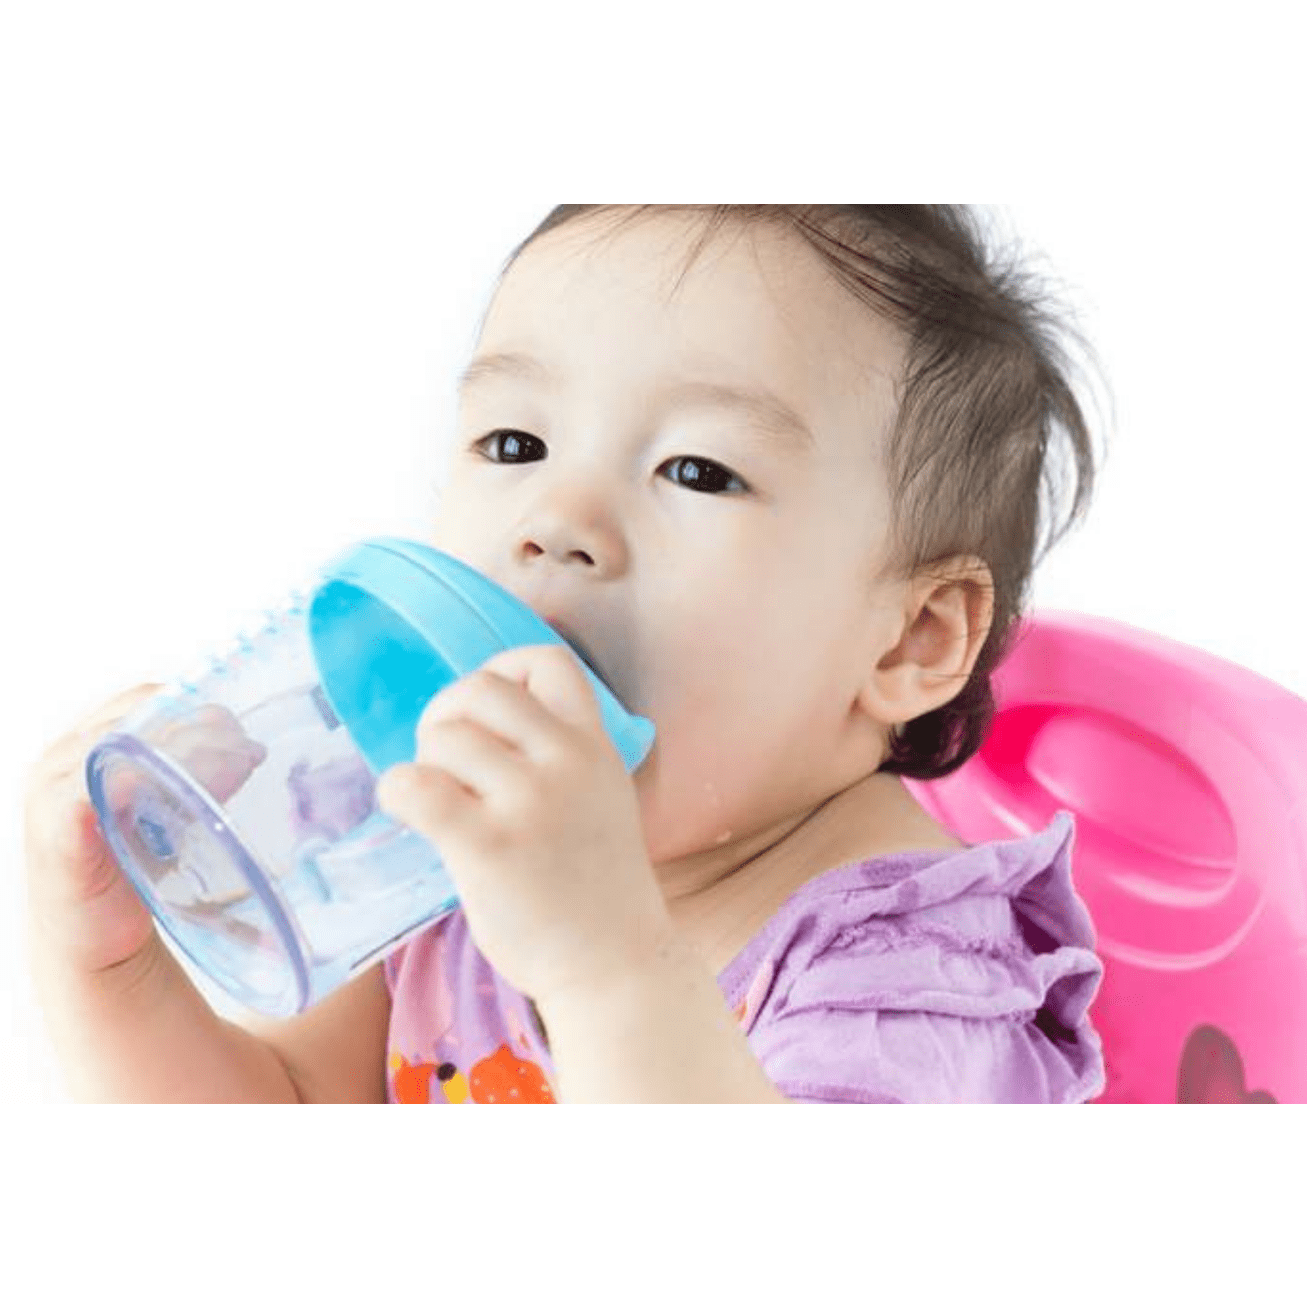 Mommy Milk Sippy Cup